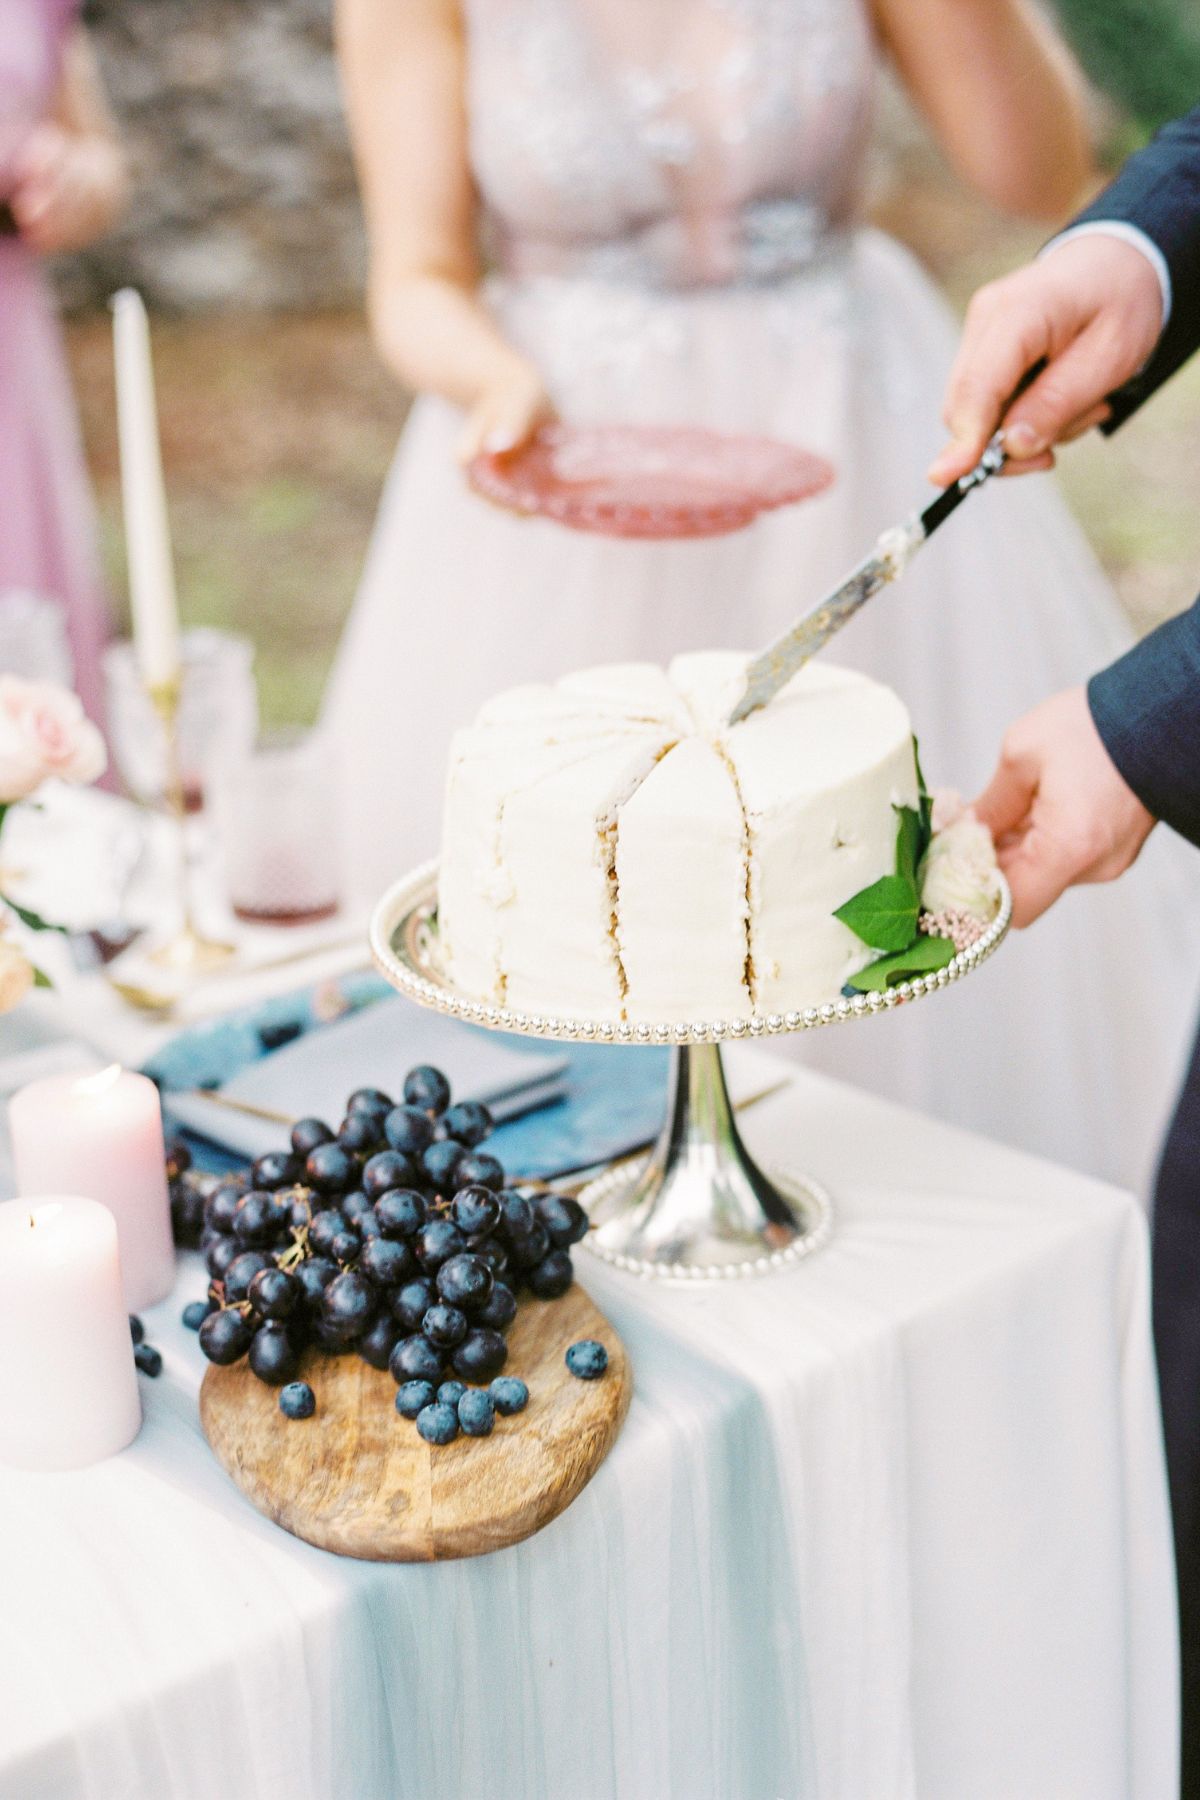 Do Wedding Planners Get Commission From Vendors?